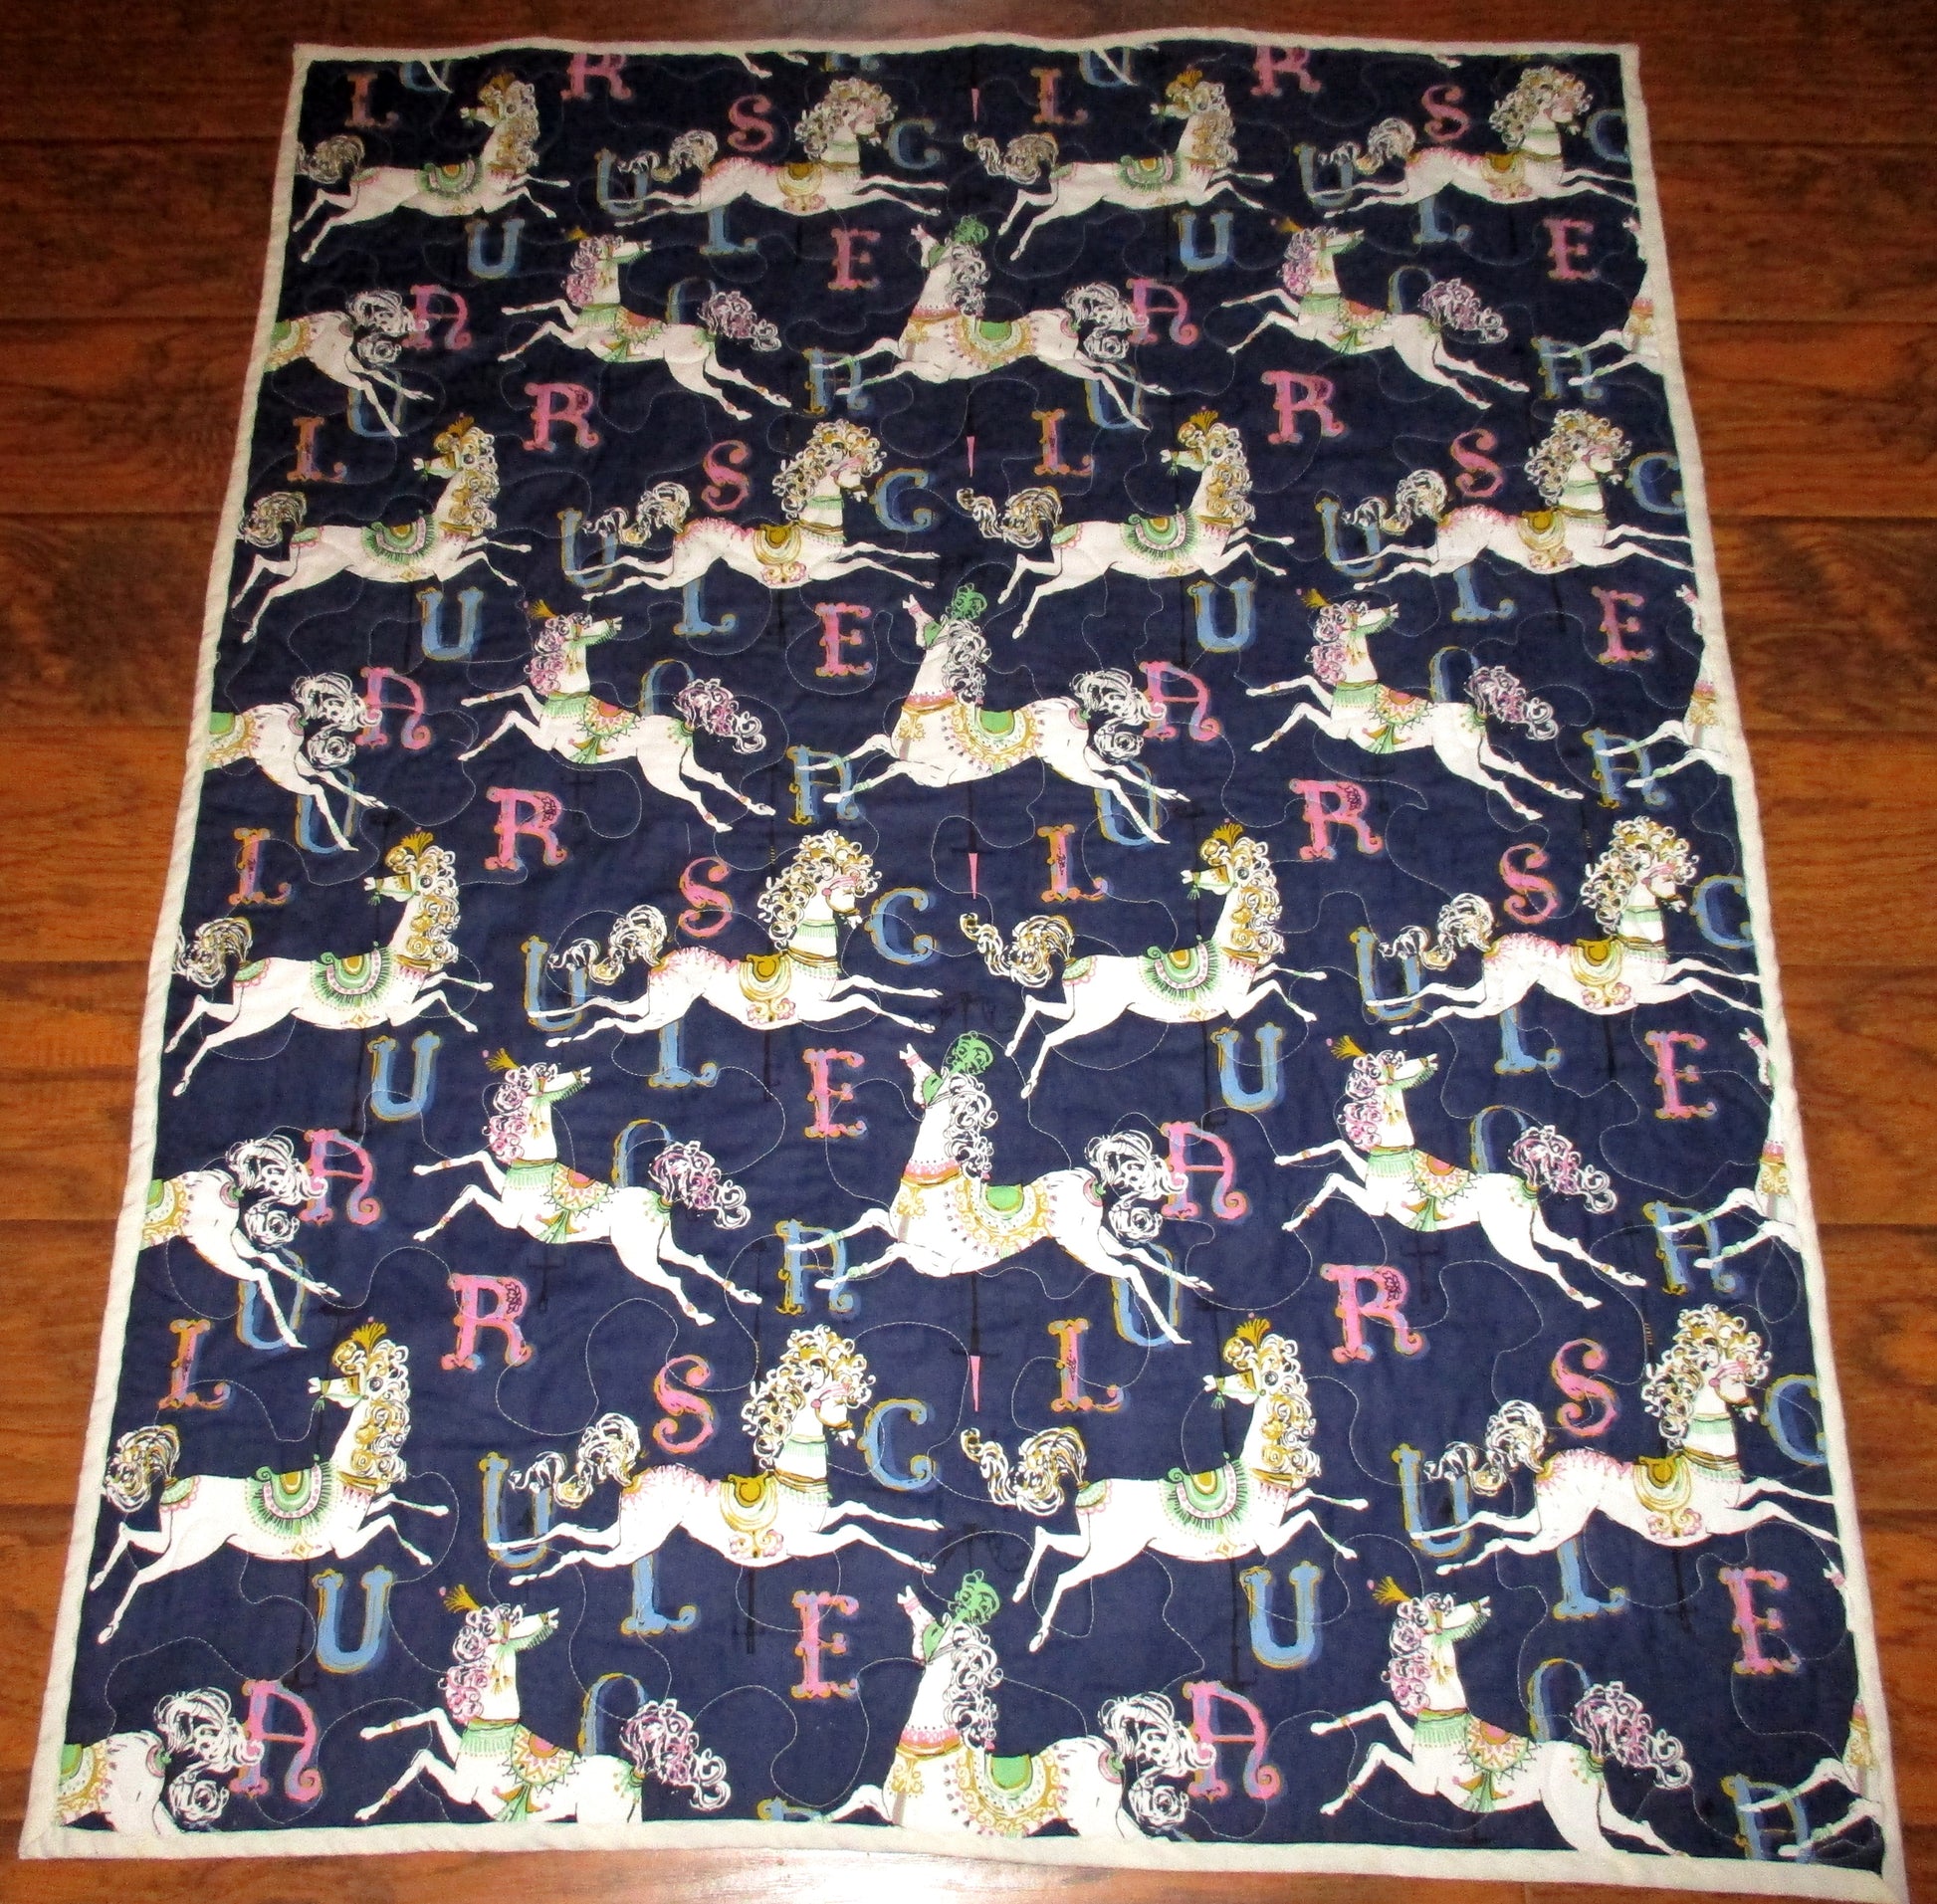 CAROUSEL WHITE HORSES Quilted Blanket 